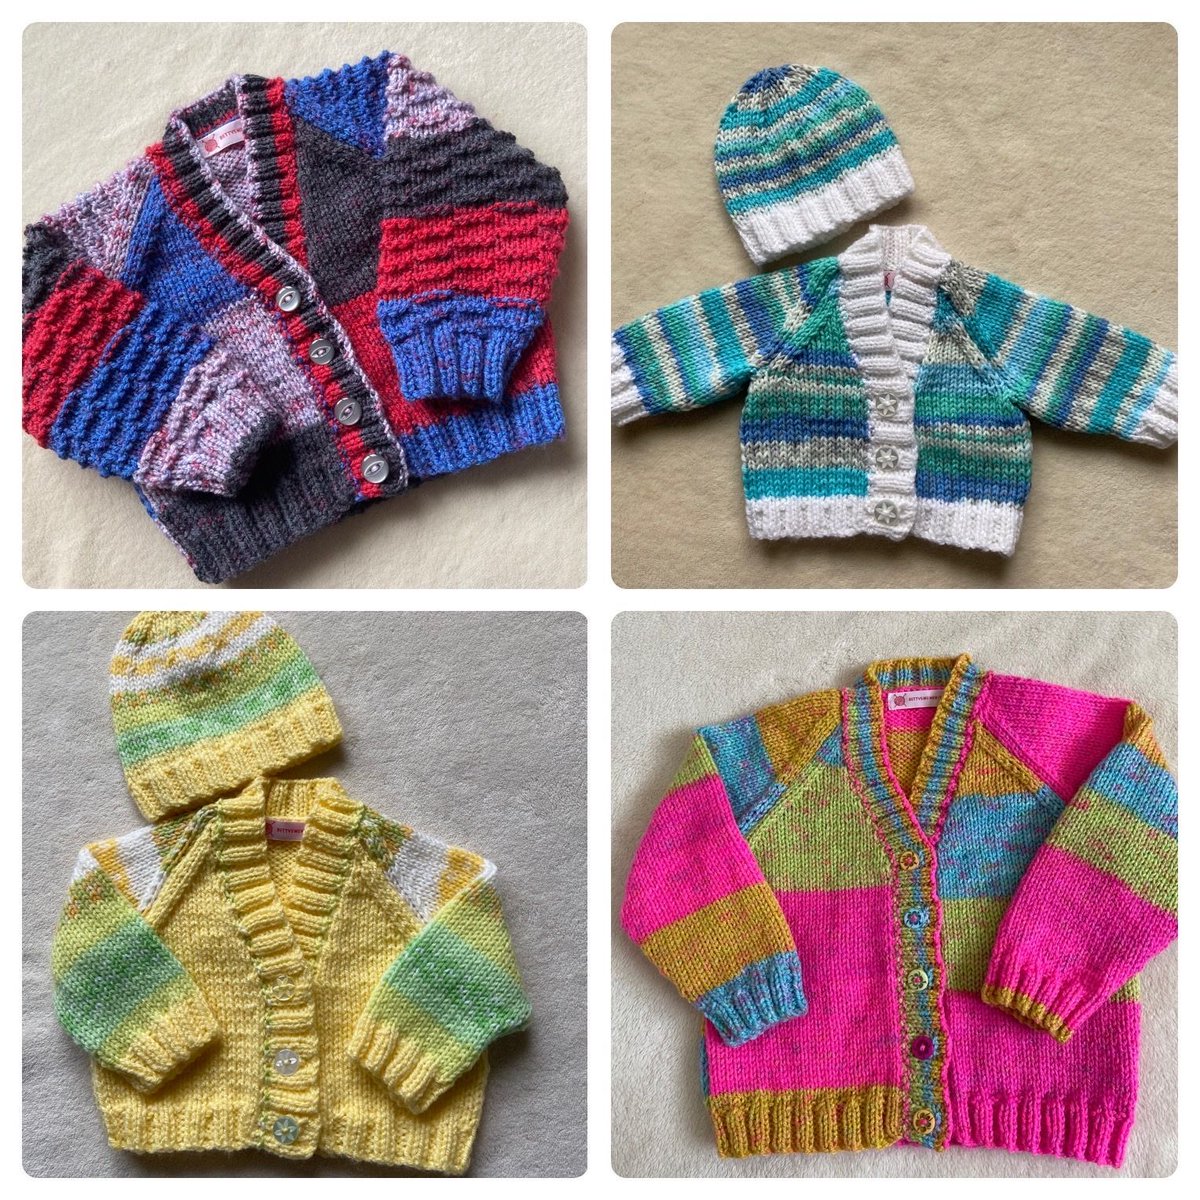 Fun colourful hand knit baby cardigans in sizes from premature to 12 months 🌈🧶 all available in my Etsy shop. Bettysmumknits.etsy.com #UKGiftHour #ShopIndie #MHHSBD #giftideas